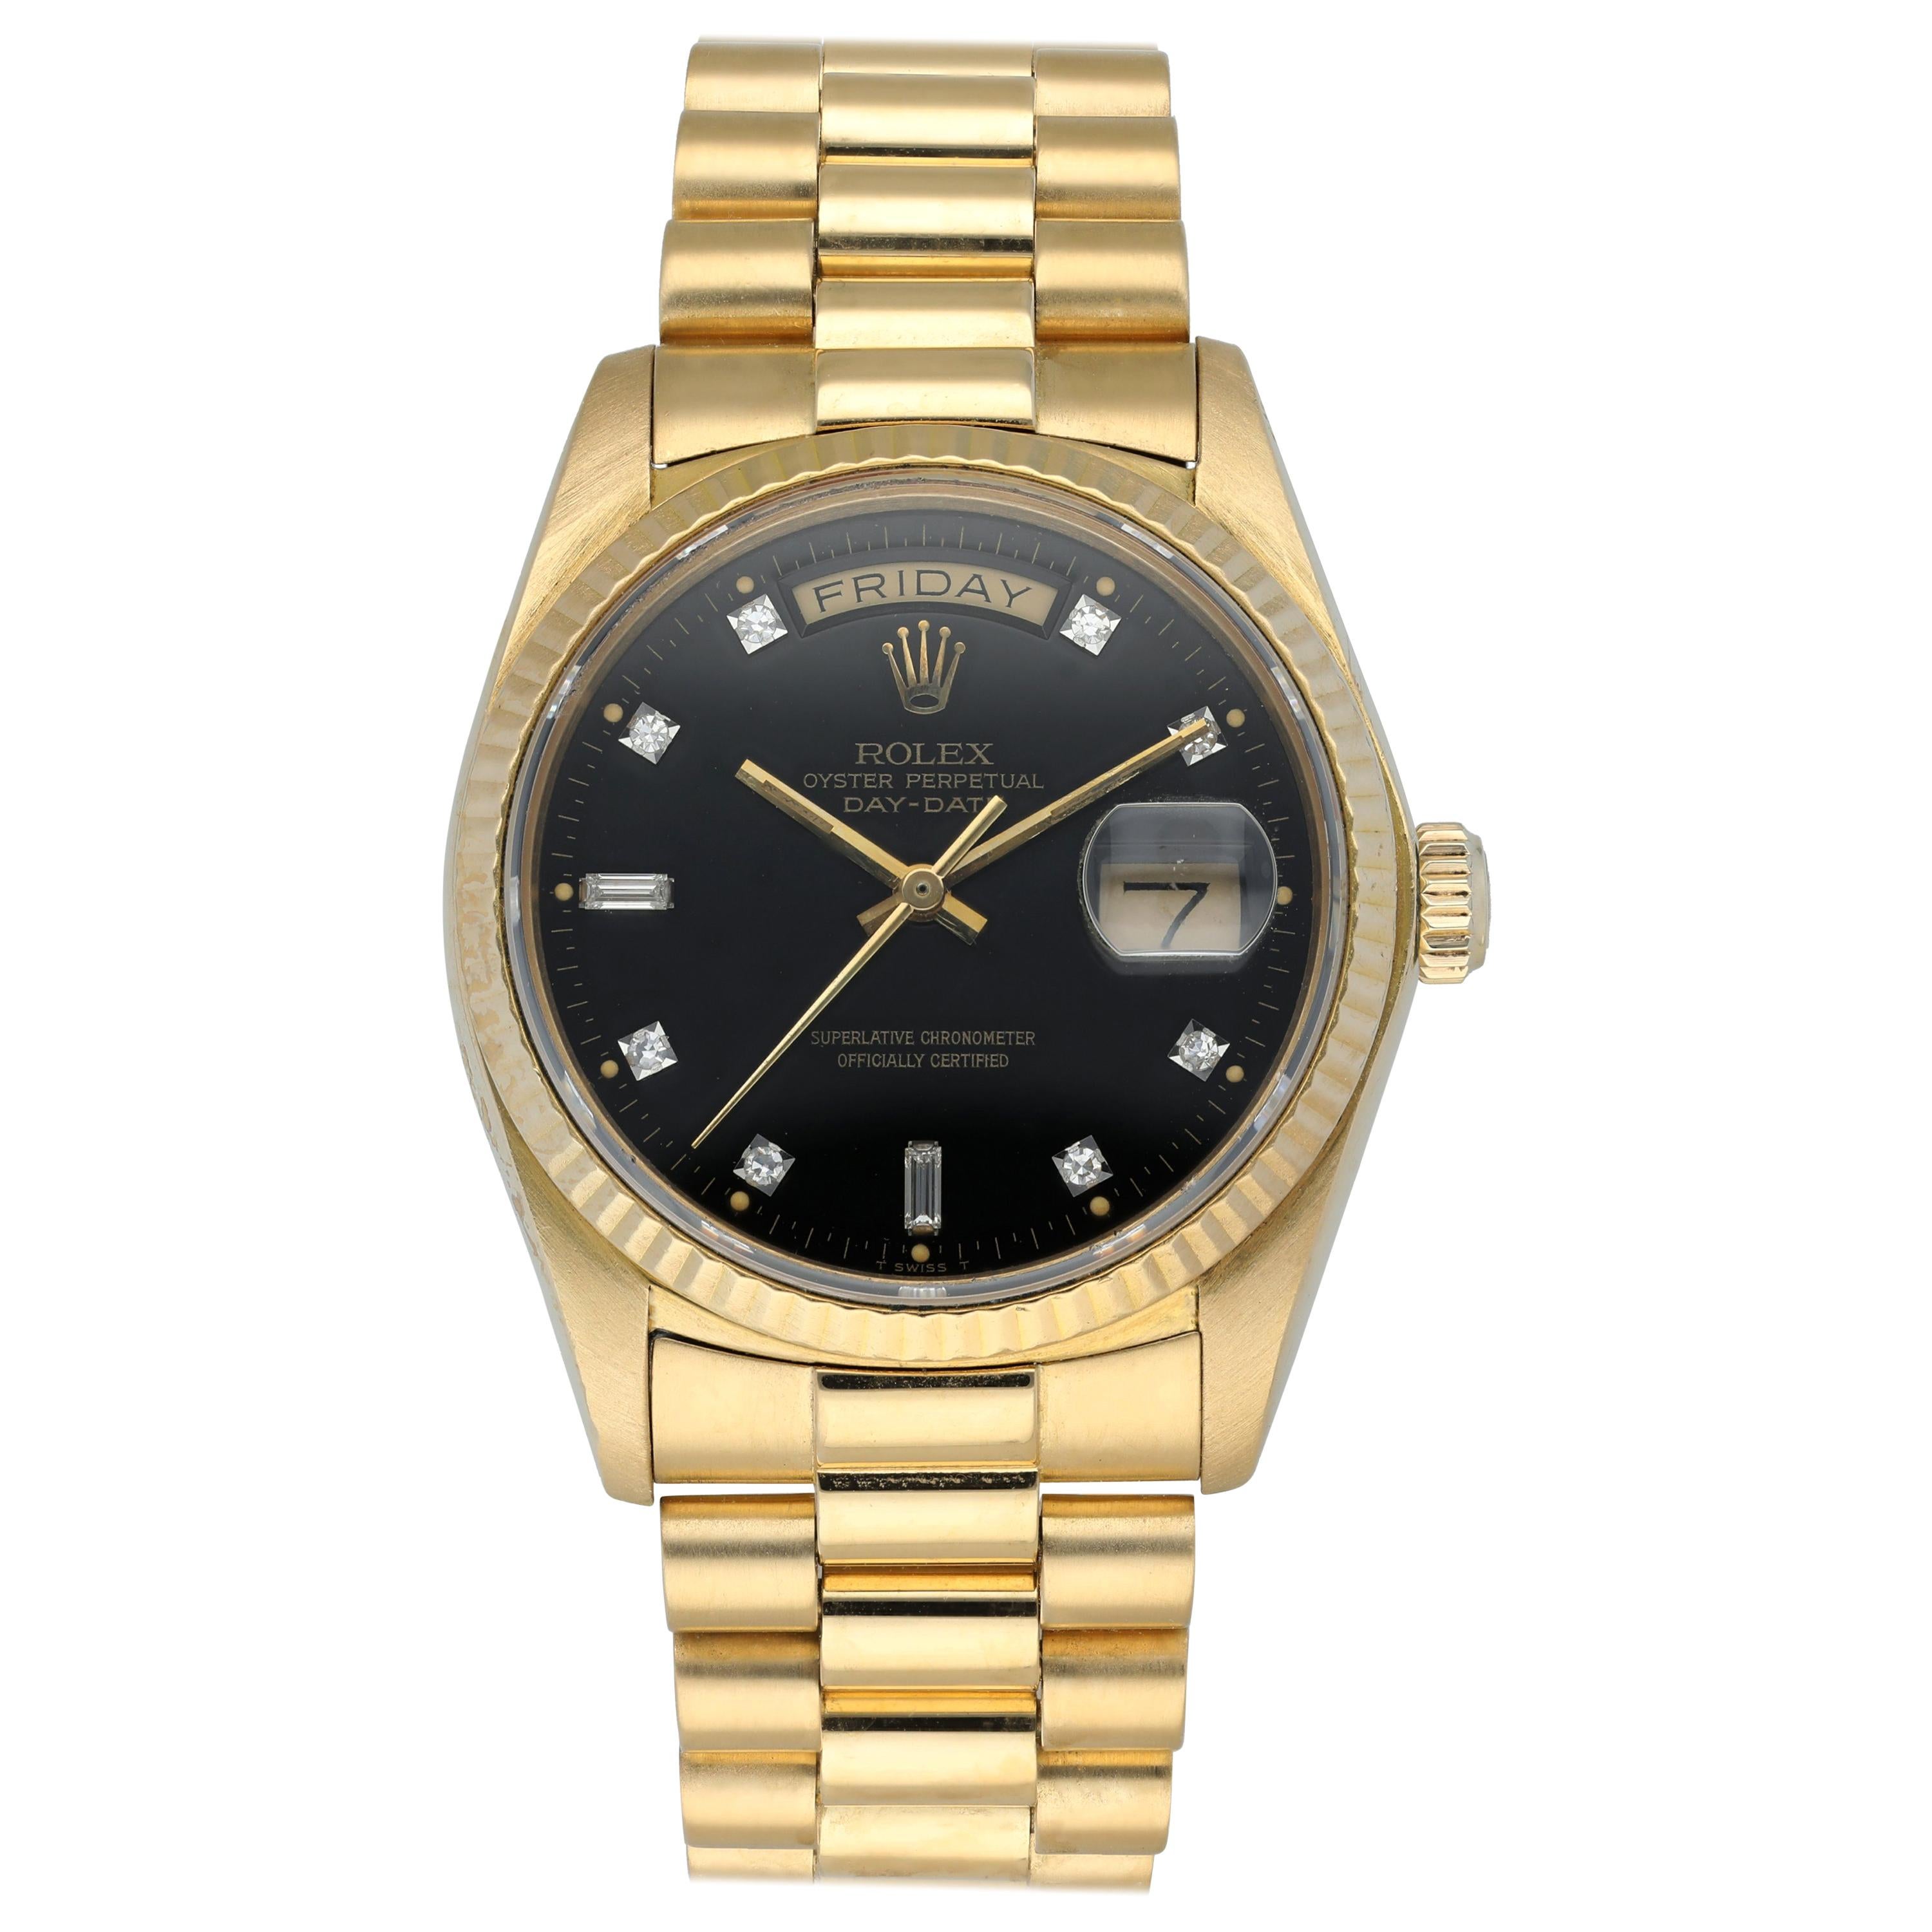 Rolex Day-Date 18038 Diamond Dial Men's Watch For Sale